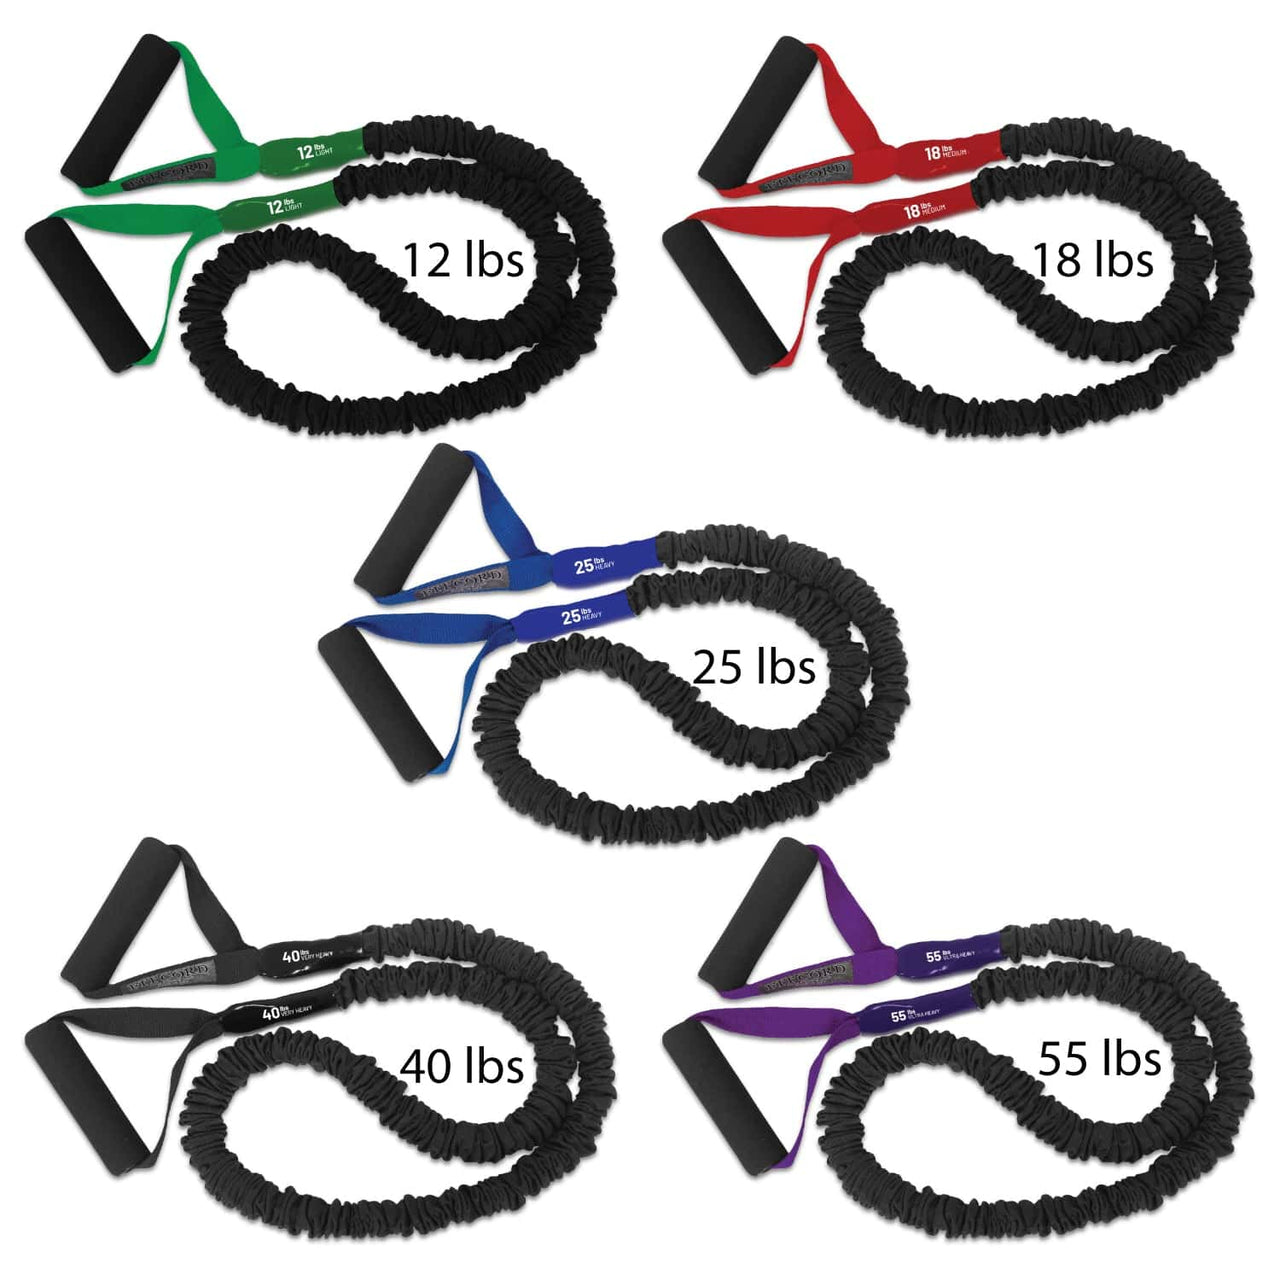 FitCord Resistance Band 5 Packs